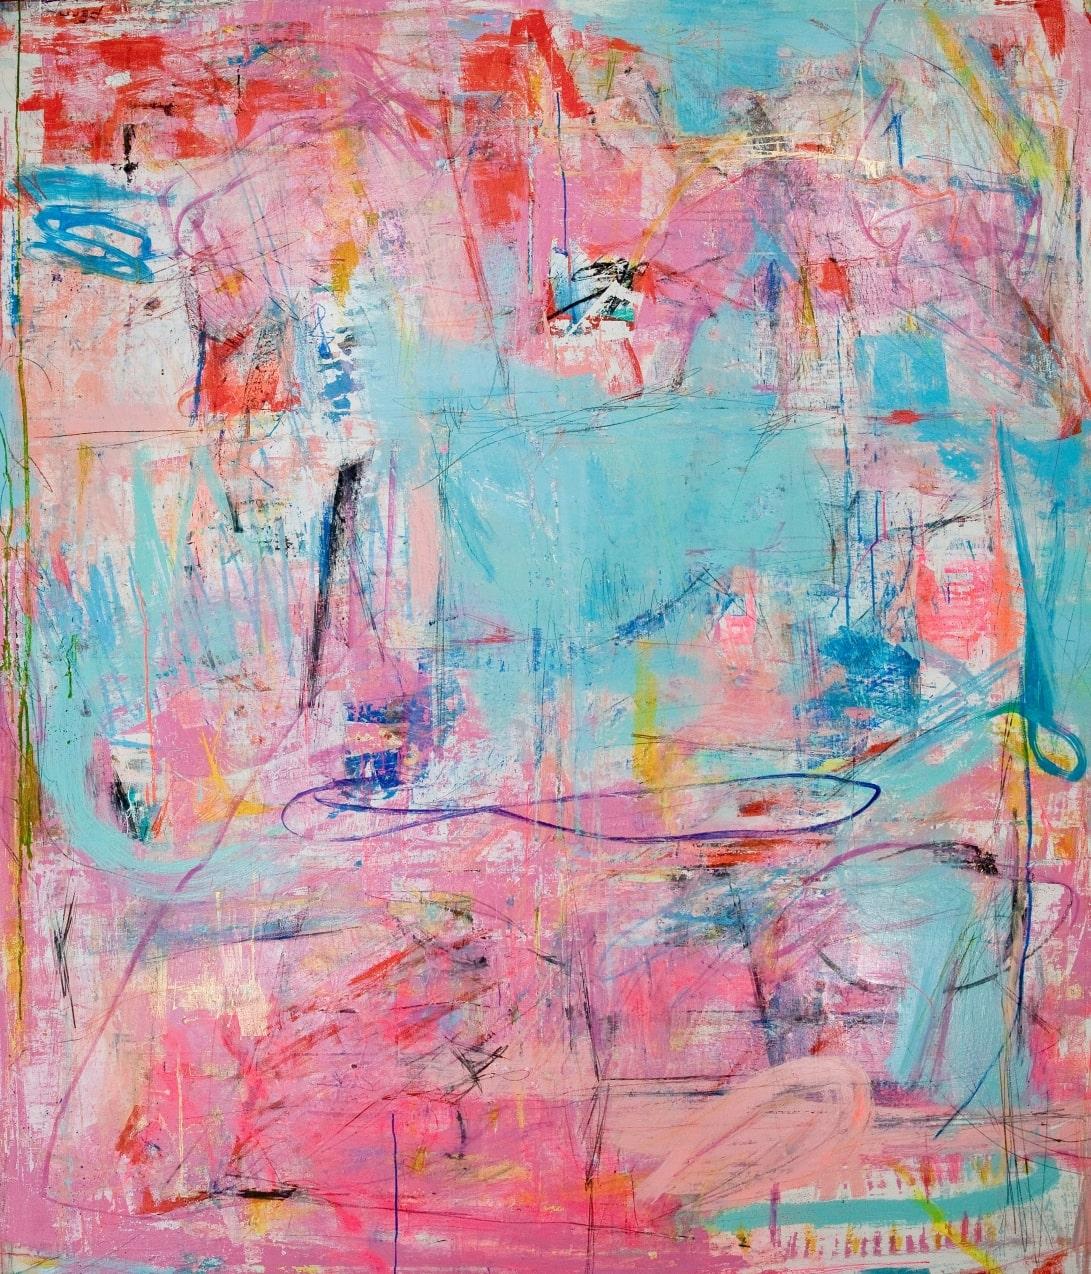 "Private Browsing"

Pink pantone brush strokes overlaid by blue tones. Mixed media abstract painting by Joseph Conrad Ferm.

See our shipping policies. For quotes, please contact us. 

All sales are final.

Born 1975, and raised in New Canaan, CT.